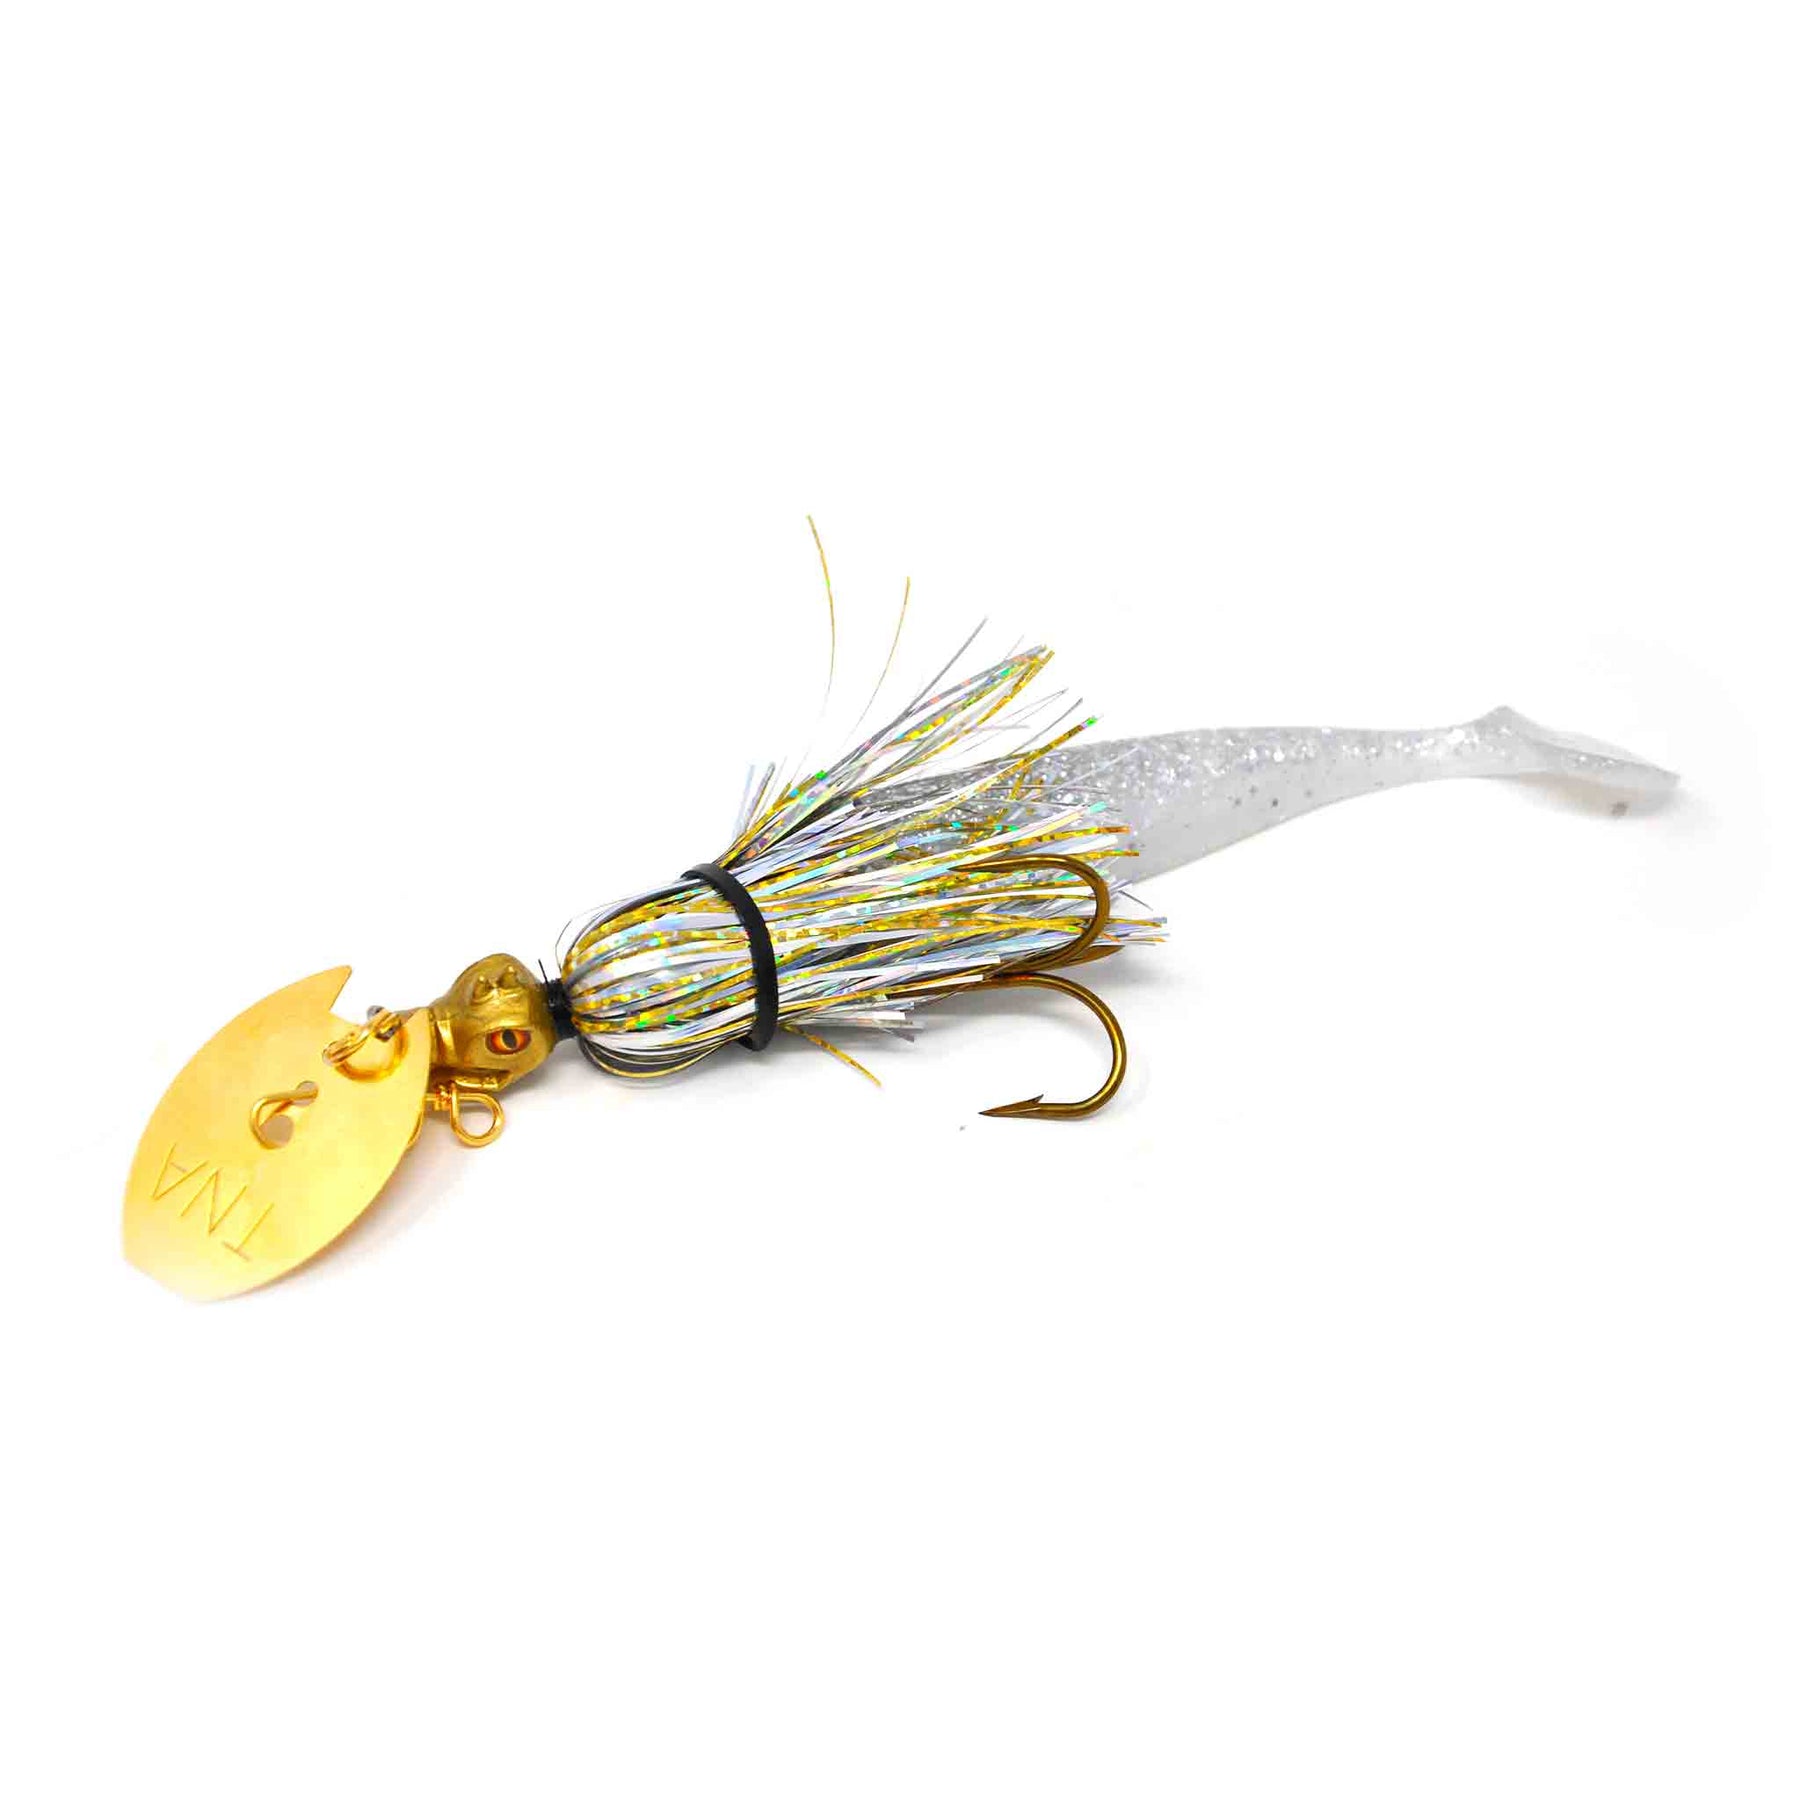 View of Chatterbaits TnA Tackle Micro Waggin Dragon Chatterbait Sparkling Mermaid available at EZOKO Pike and Musky Shop